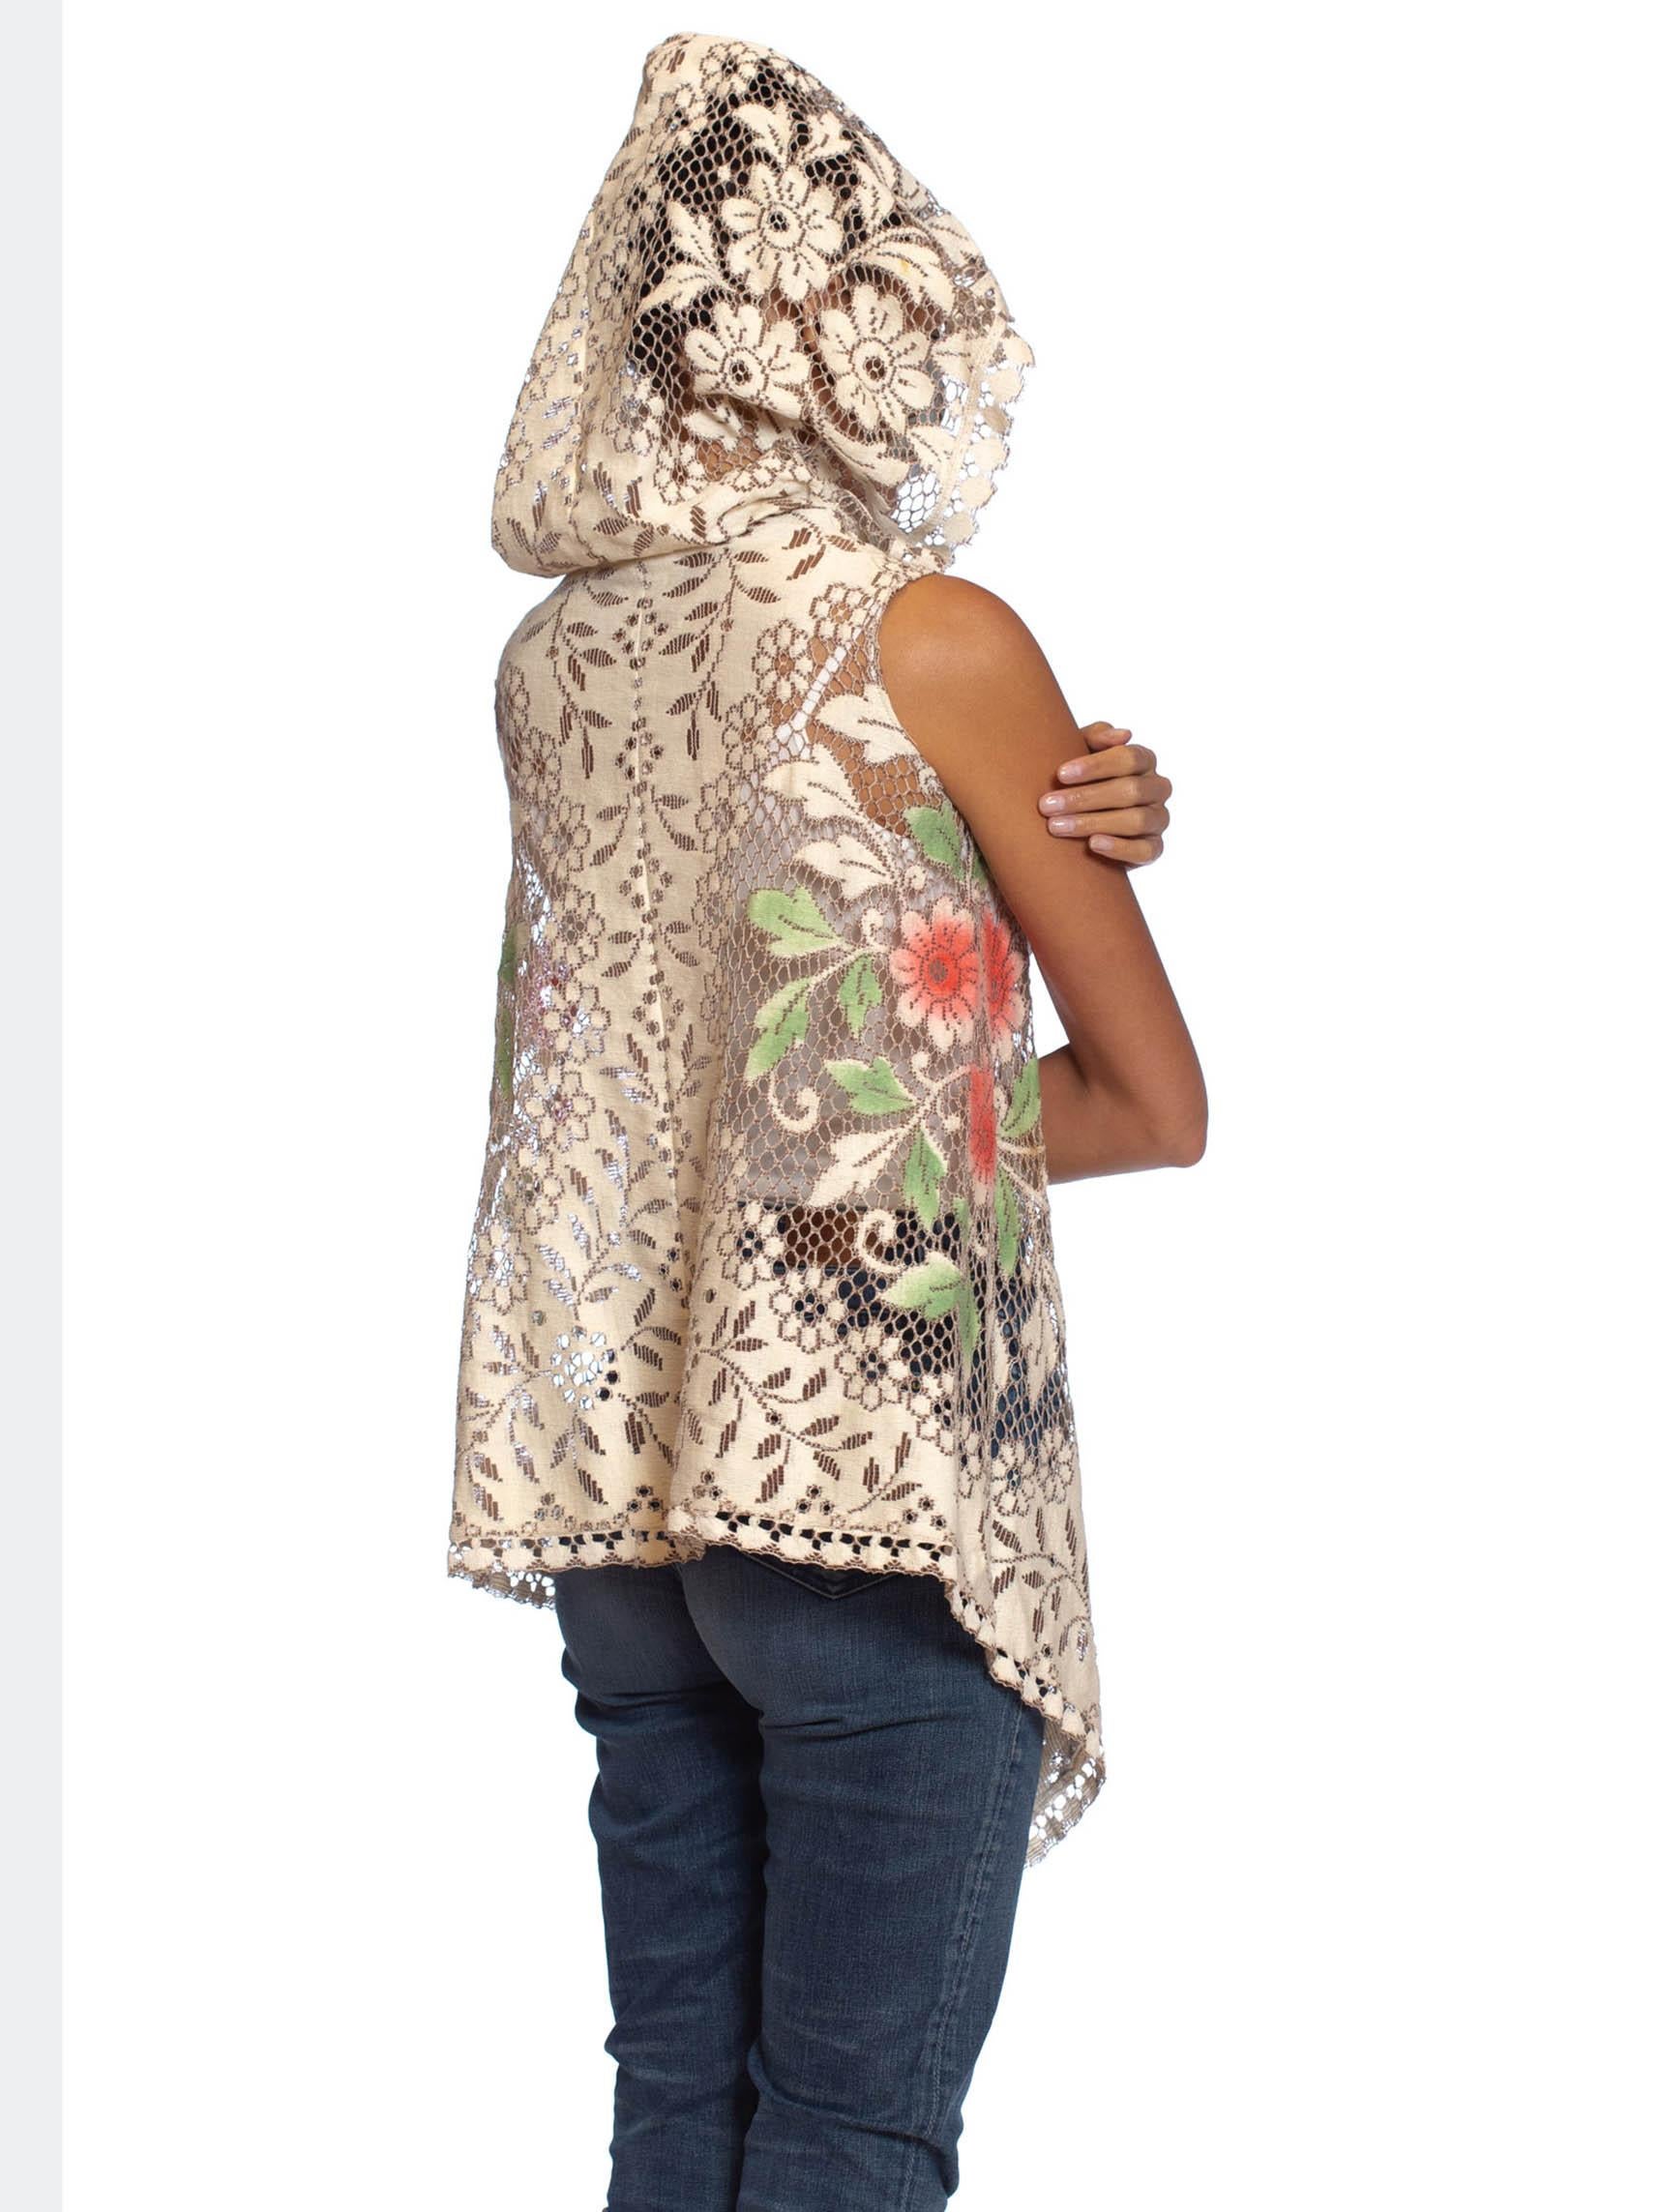 MORPHEW COLLECTION Ecru Cotton Lace Boho Hooded  Vest With Hand Painted Highlig For Sale 1